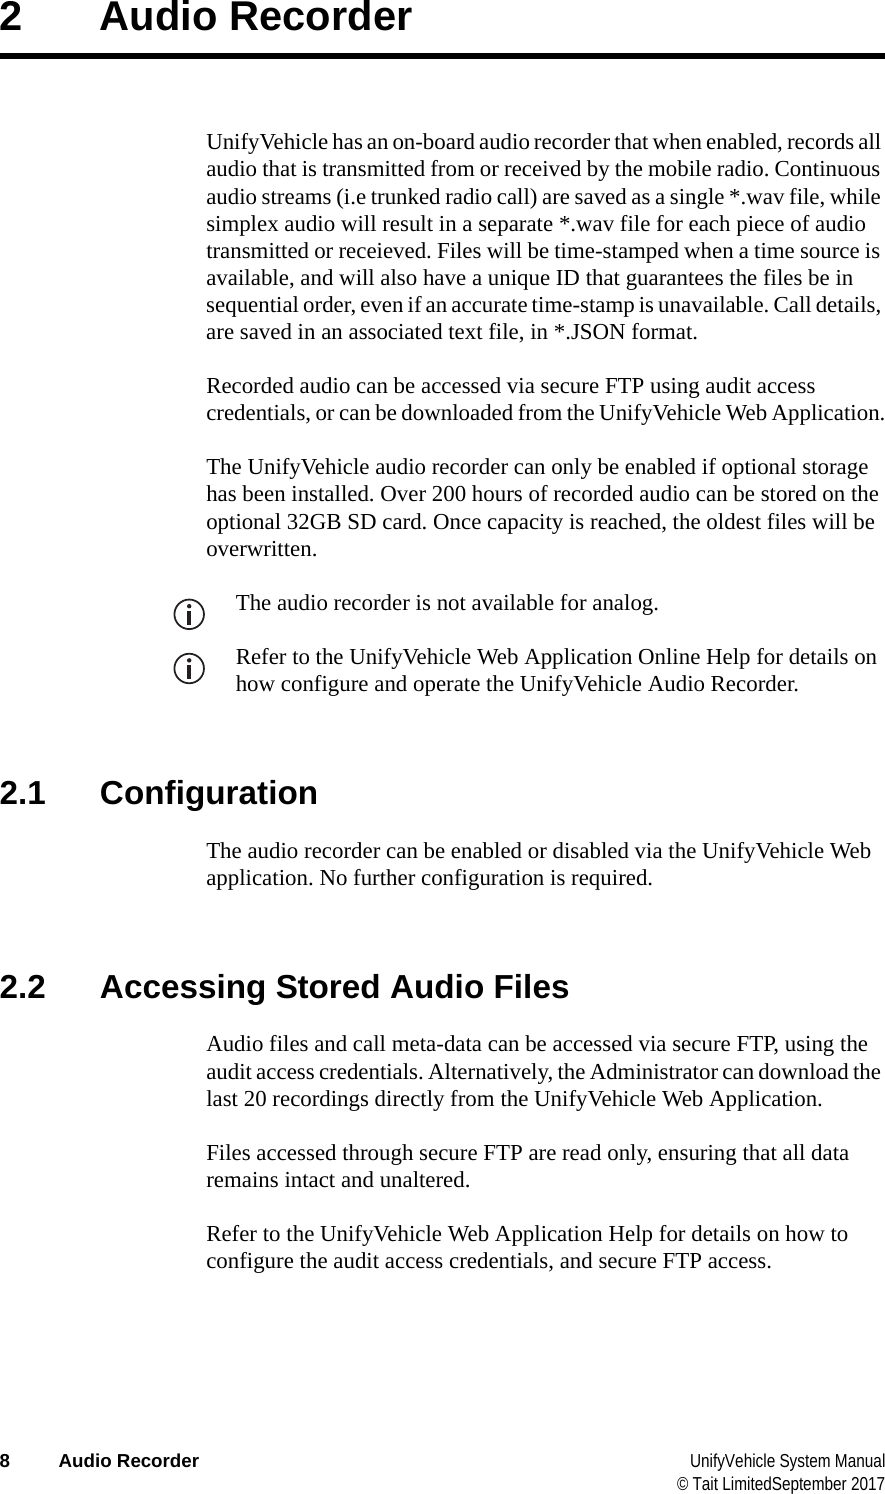  8 Audio Recorder UnifyVehicle System Manual© Tait LimitedSeptember 20172 Audio RecorderUnifyVehicle has an on-board audio recorder that when enabled, records all audio that is transmitted from or received by the mobile radio. Continuous audio streams (i.e trunked radio call) are saved as a single *.wav file, while simplex audio will result in a separate *.wav file for each piece of audio transmitted or receieved. Files will be time-stamped when a time source is available, and will also have a unique ID that guarantees the files be in sequential order, even if an accurate time-stamp is unavailable. Call details, are saved in an associated text file, in *.JSON format.Recorded audio can be accessed via secure FTP using audit access credentials, or can be downloaded from the UnifyVehicle Web Application.The UnifyVehicle audio recorder can only be enabled if optional storage has been installed. Over 200 hours of recorded audio can be stored on the optional 32GB SD card. Once capacity is reached, the oldest files will be overwritten.The audio recorder is not available for analog.Refer to the UnifyVehicle Web Application Online Help for details on how configure and operate the UnifyVehicle Audio Recorder.2.1 ConfigurationThe audio recorder can be enabled or disabled via the UnifyVehicle Web application. No further configuration is required.2.2 Accessing Stored Audio FilesAudio files and call meta-data can be accessed via secure FTP, using the audit access credentials. Alternatively, the Administrator can download the last 20 recordings directly from the UnifyVehicle Web Application.Files accessed through secure FTP are read only, ensuring that all data remains intact and unaltered.Refer to the UnifyVehicle Web Application Help for details on how to configure the audit access credentials, and secure FTP access.